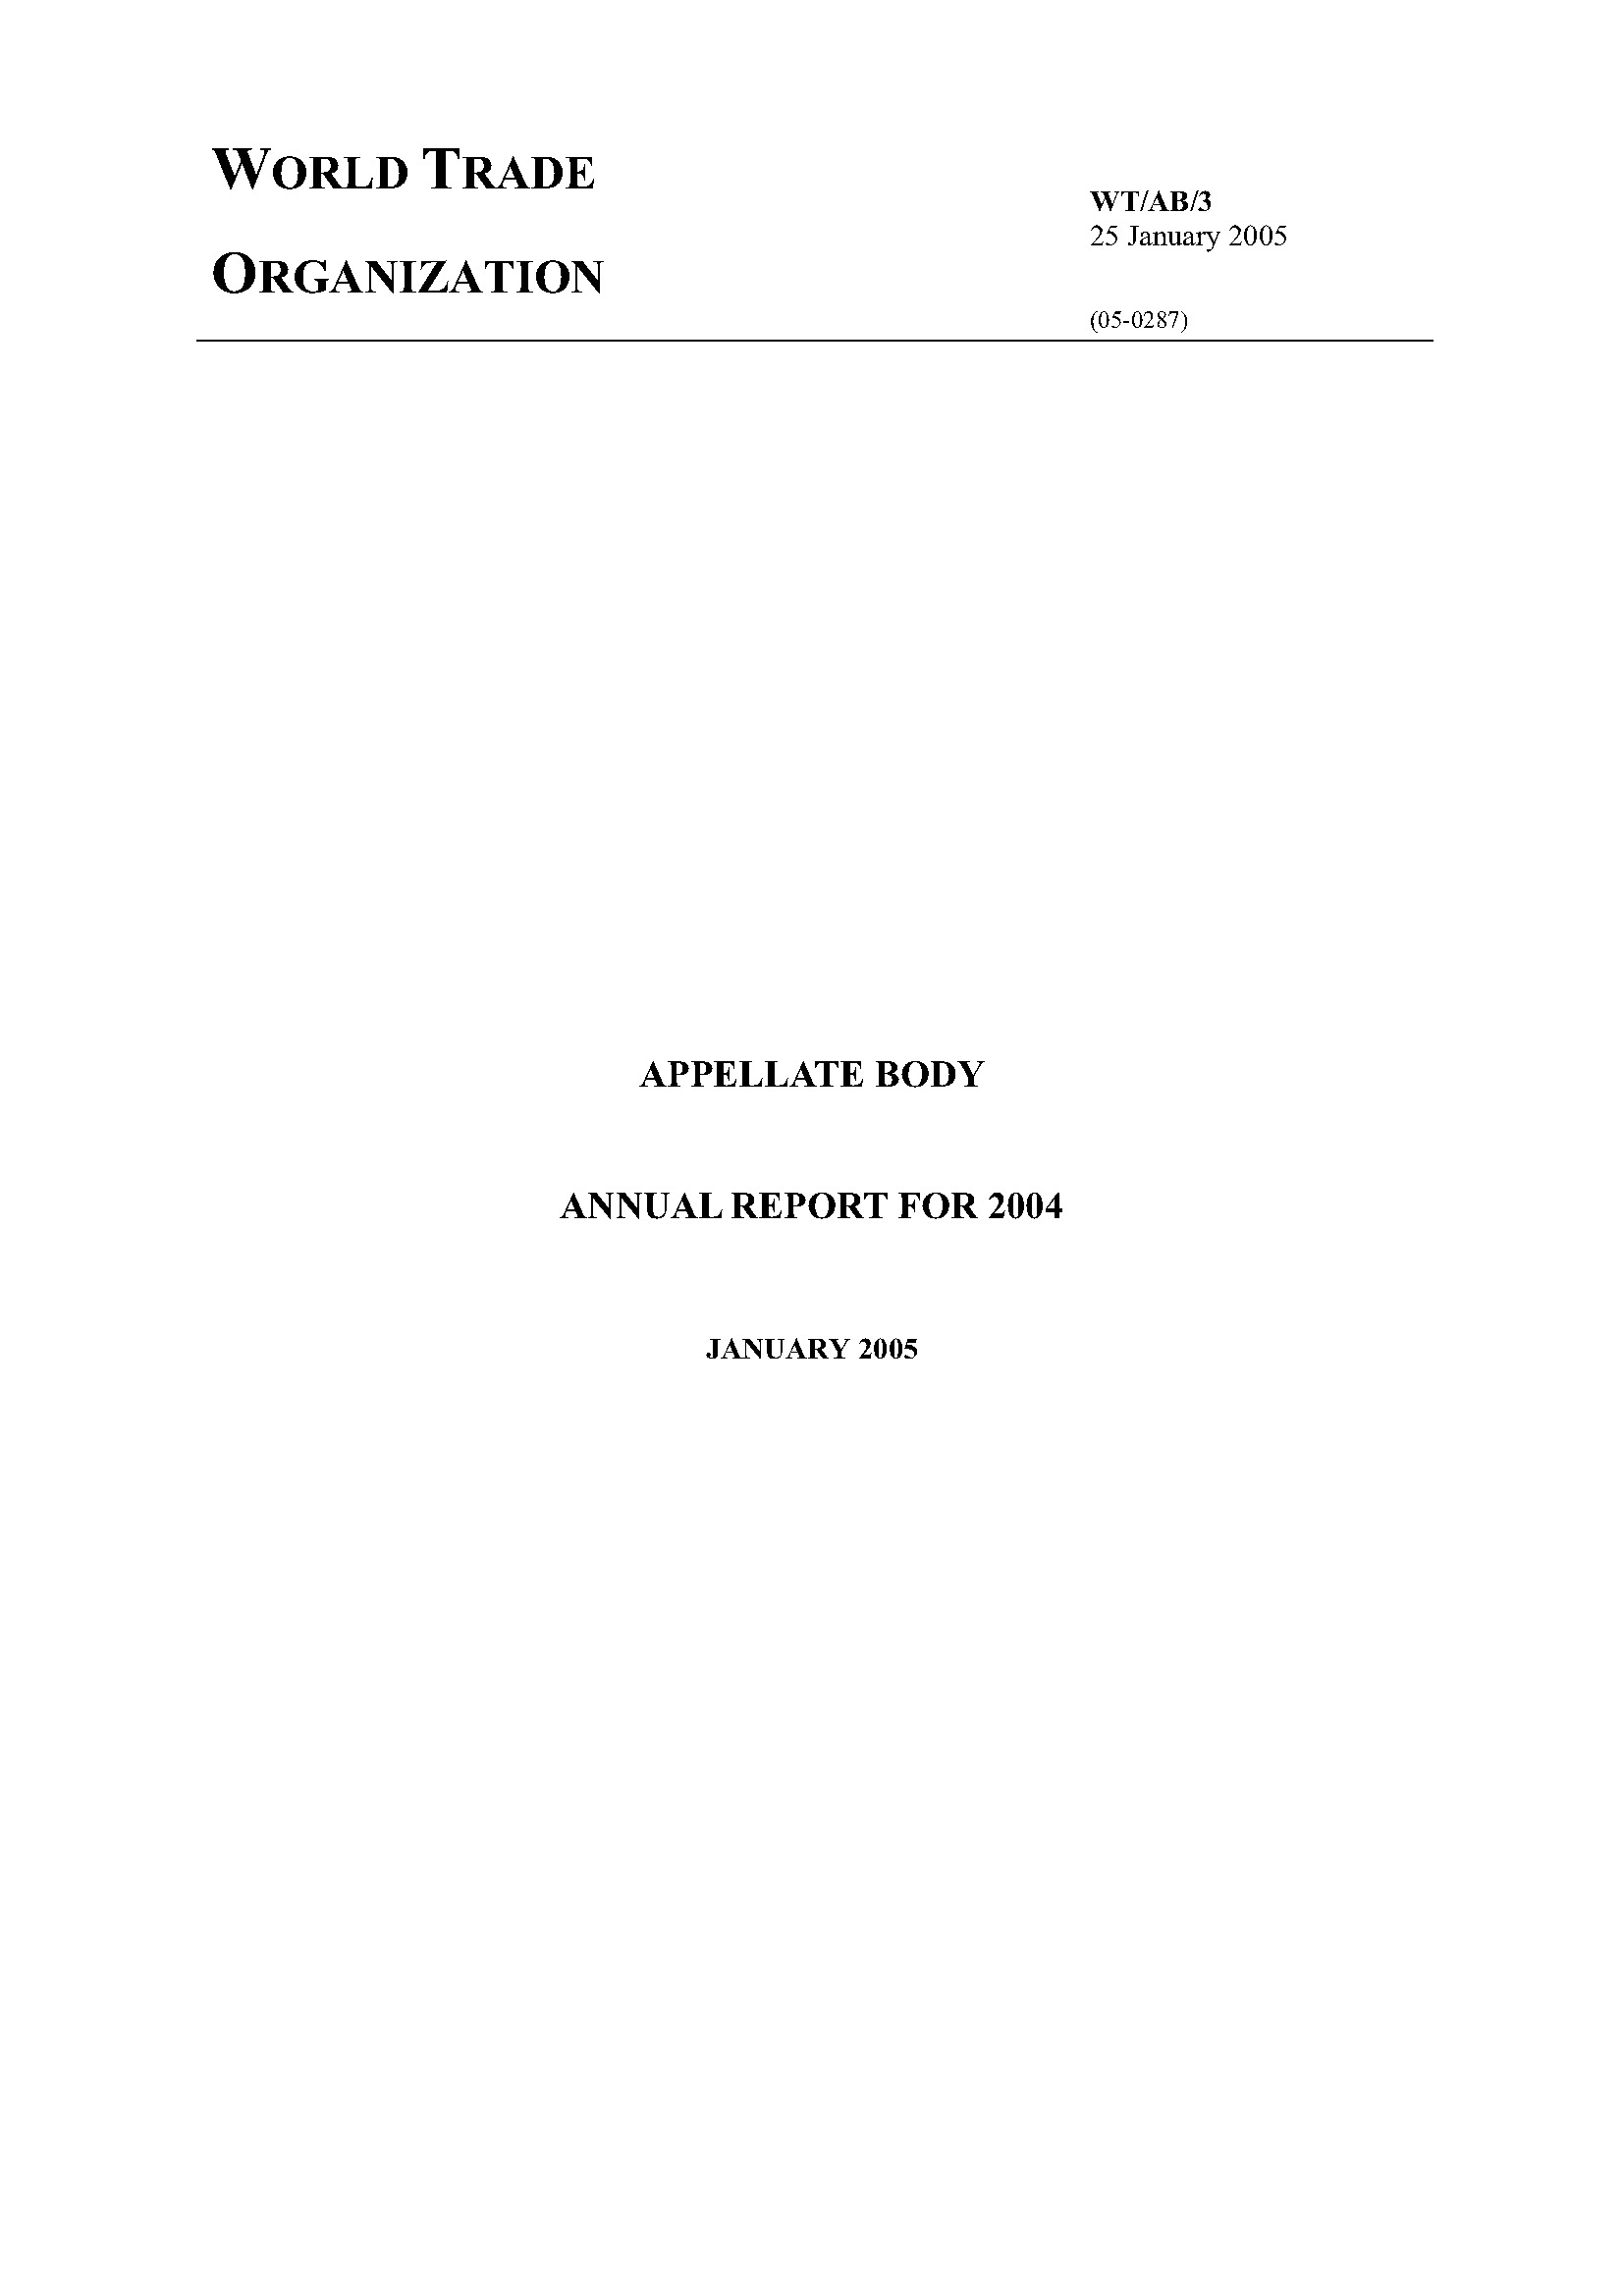 image of Appellate Body annual report for 2004